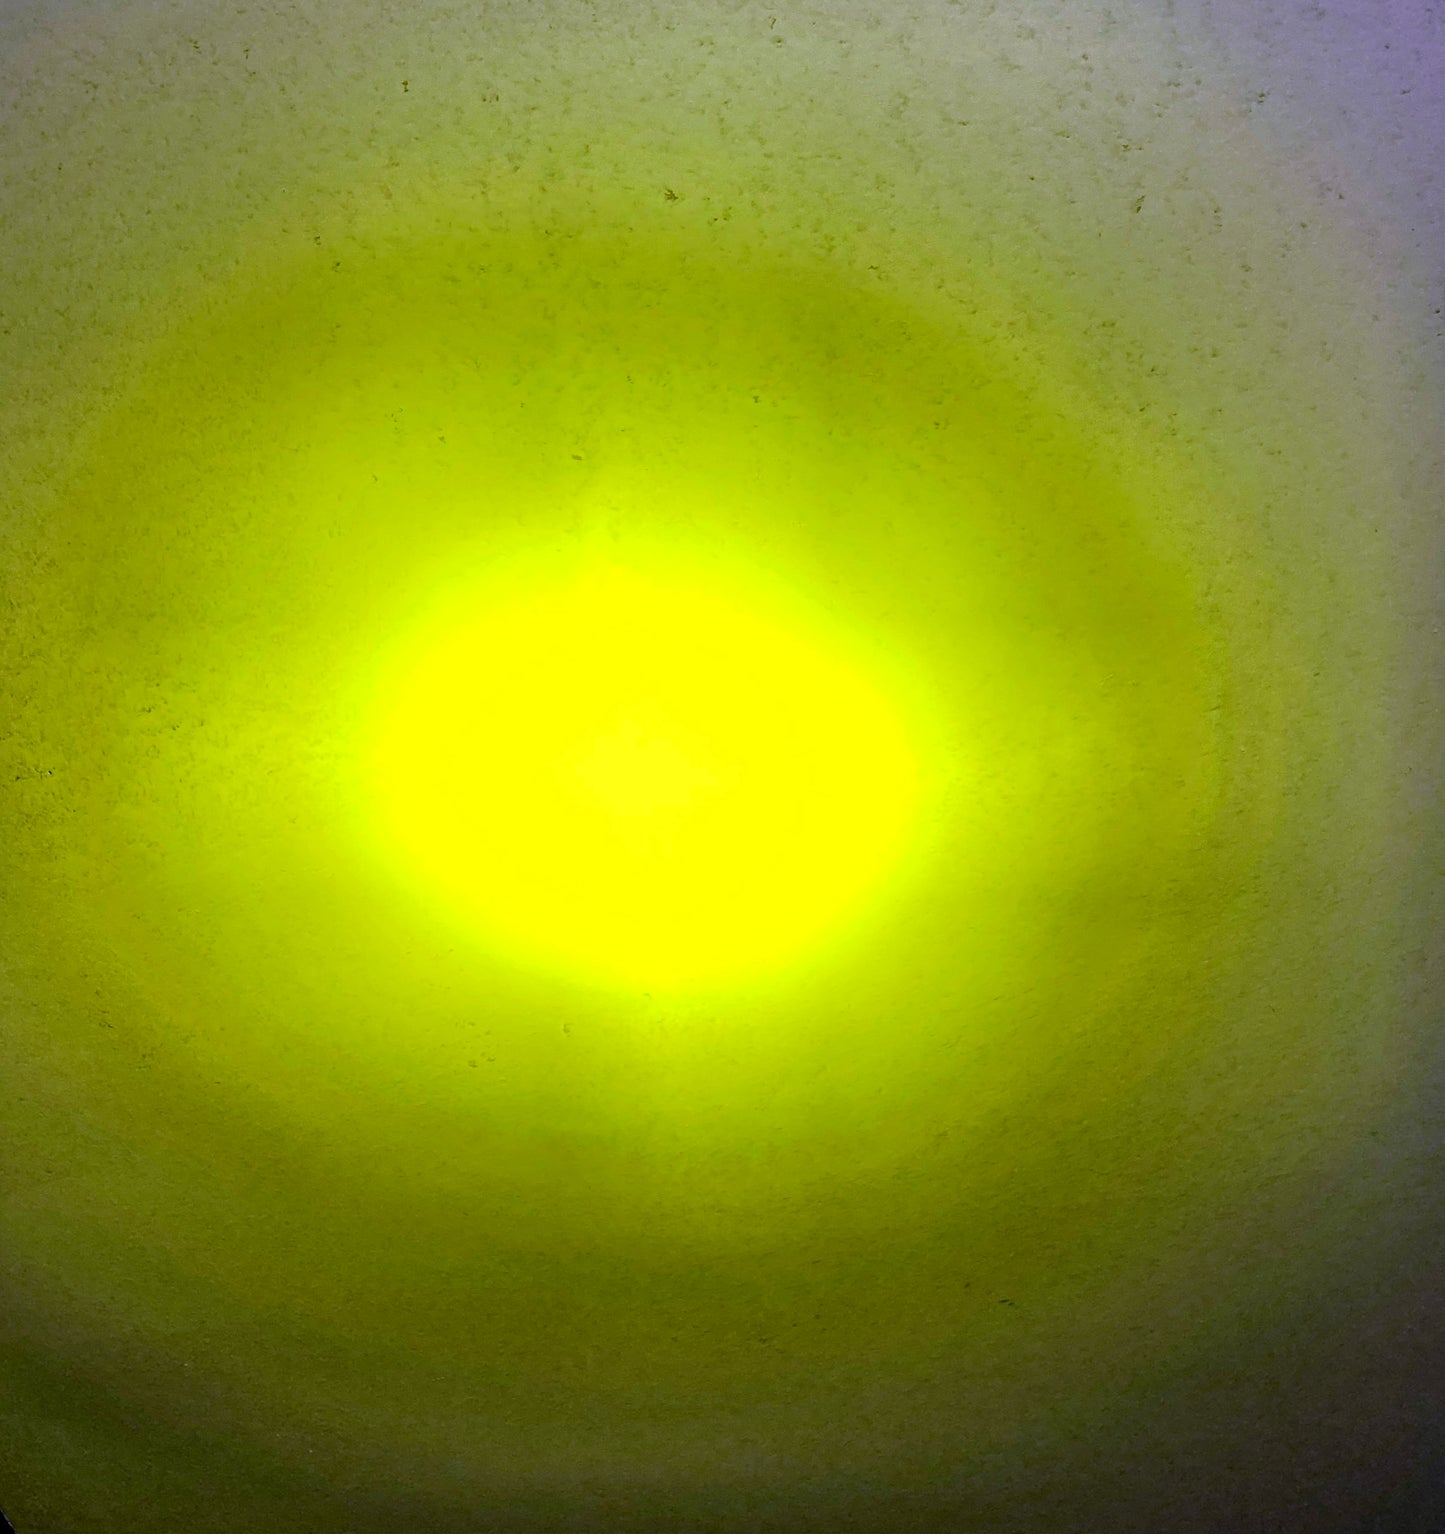 Code 4 LED 3″ 25 Watt round pod light in spot pattern and yellow lens, sold in pairs